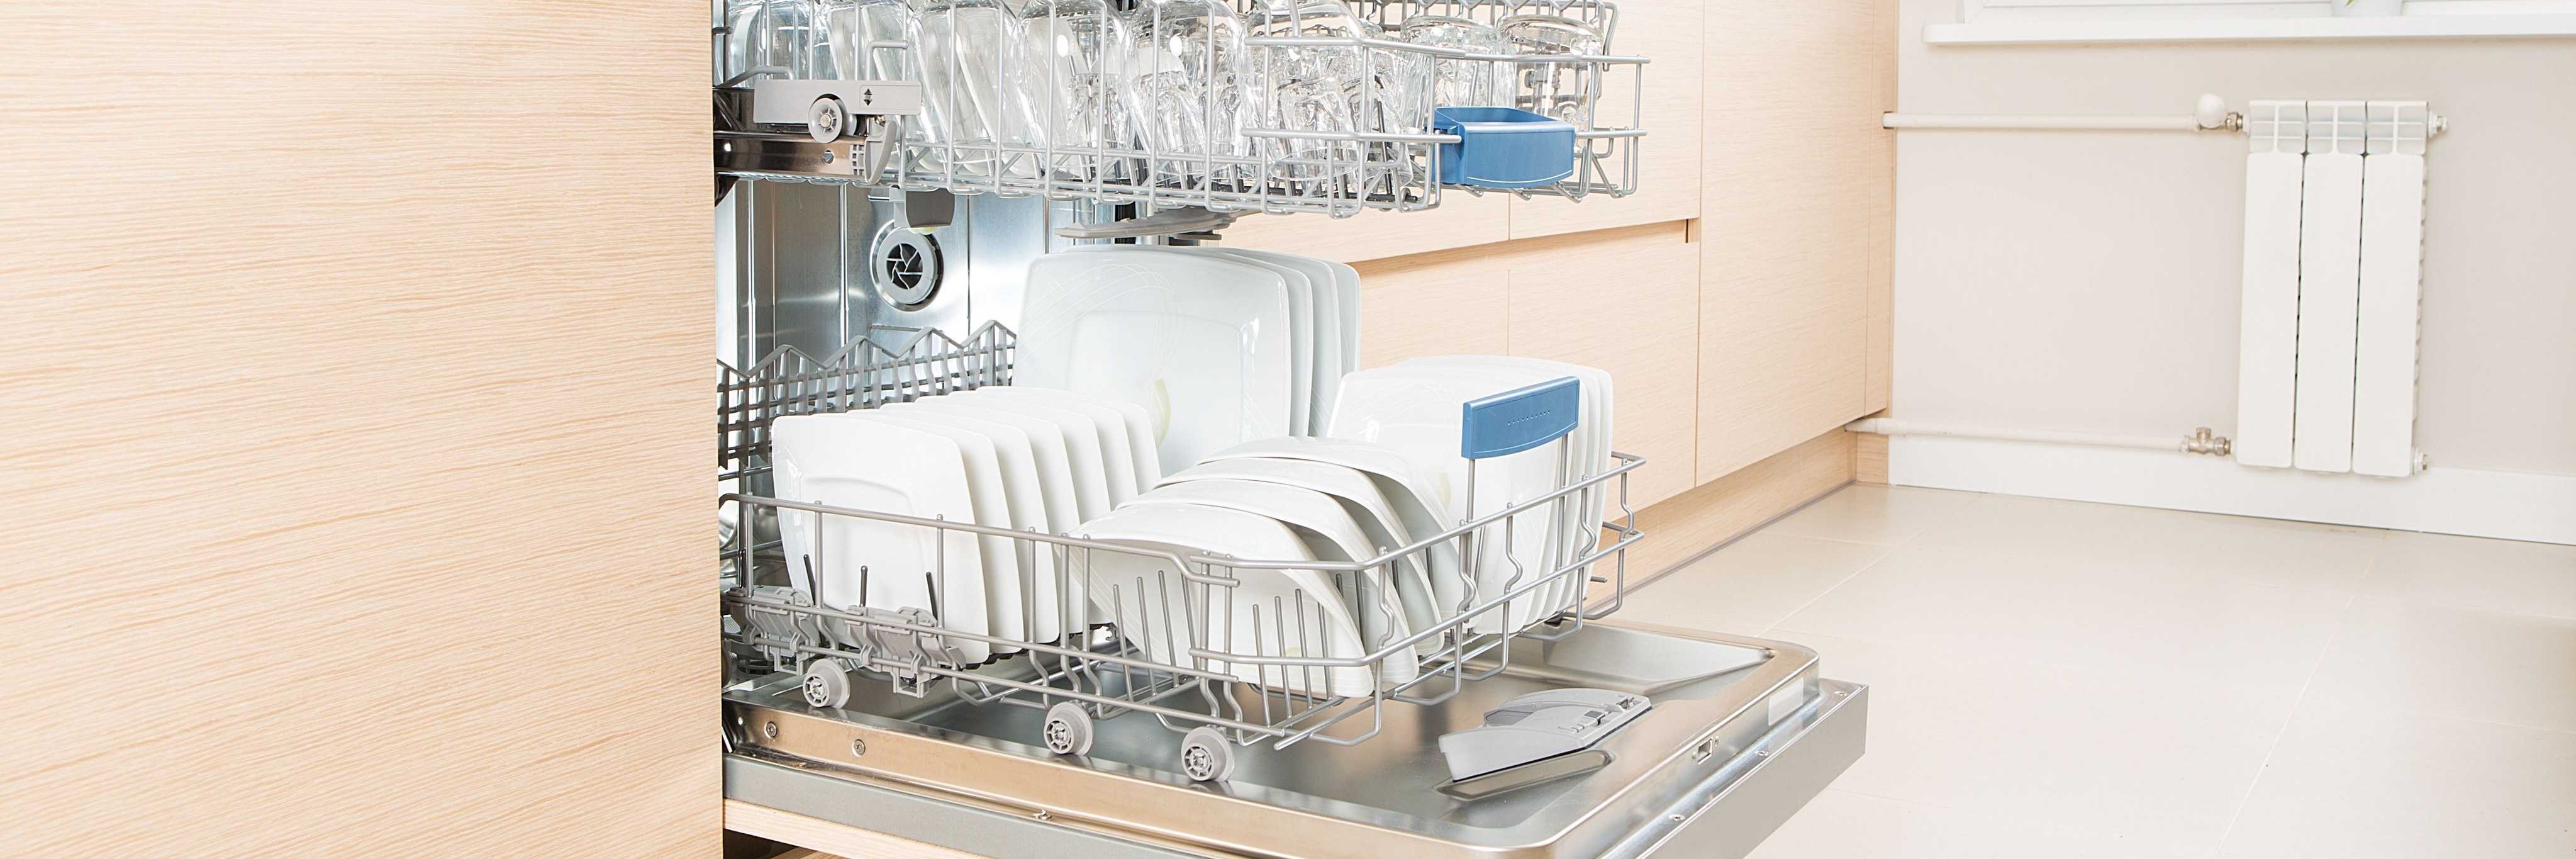 Best time to buy a dishwasher